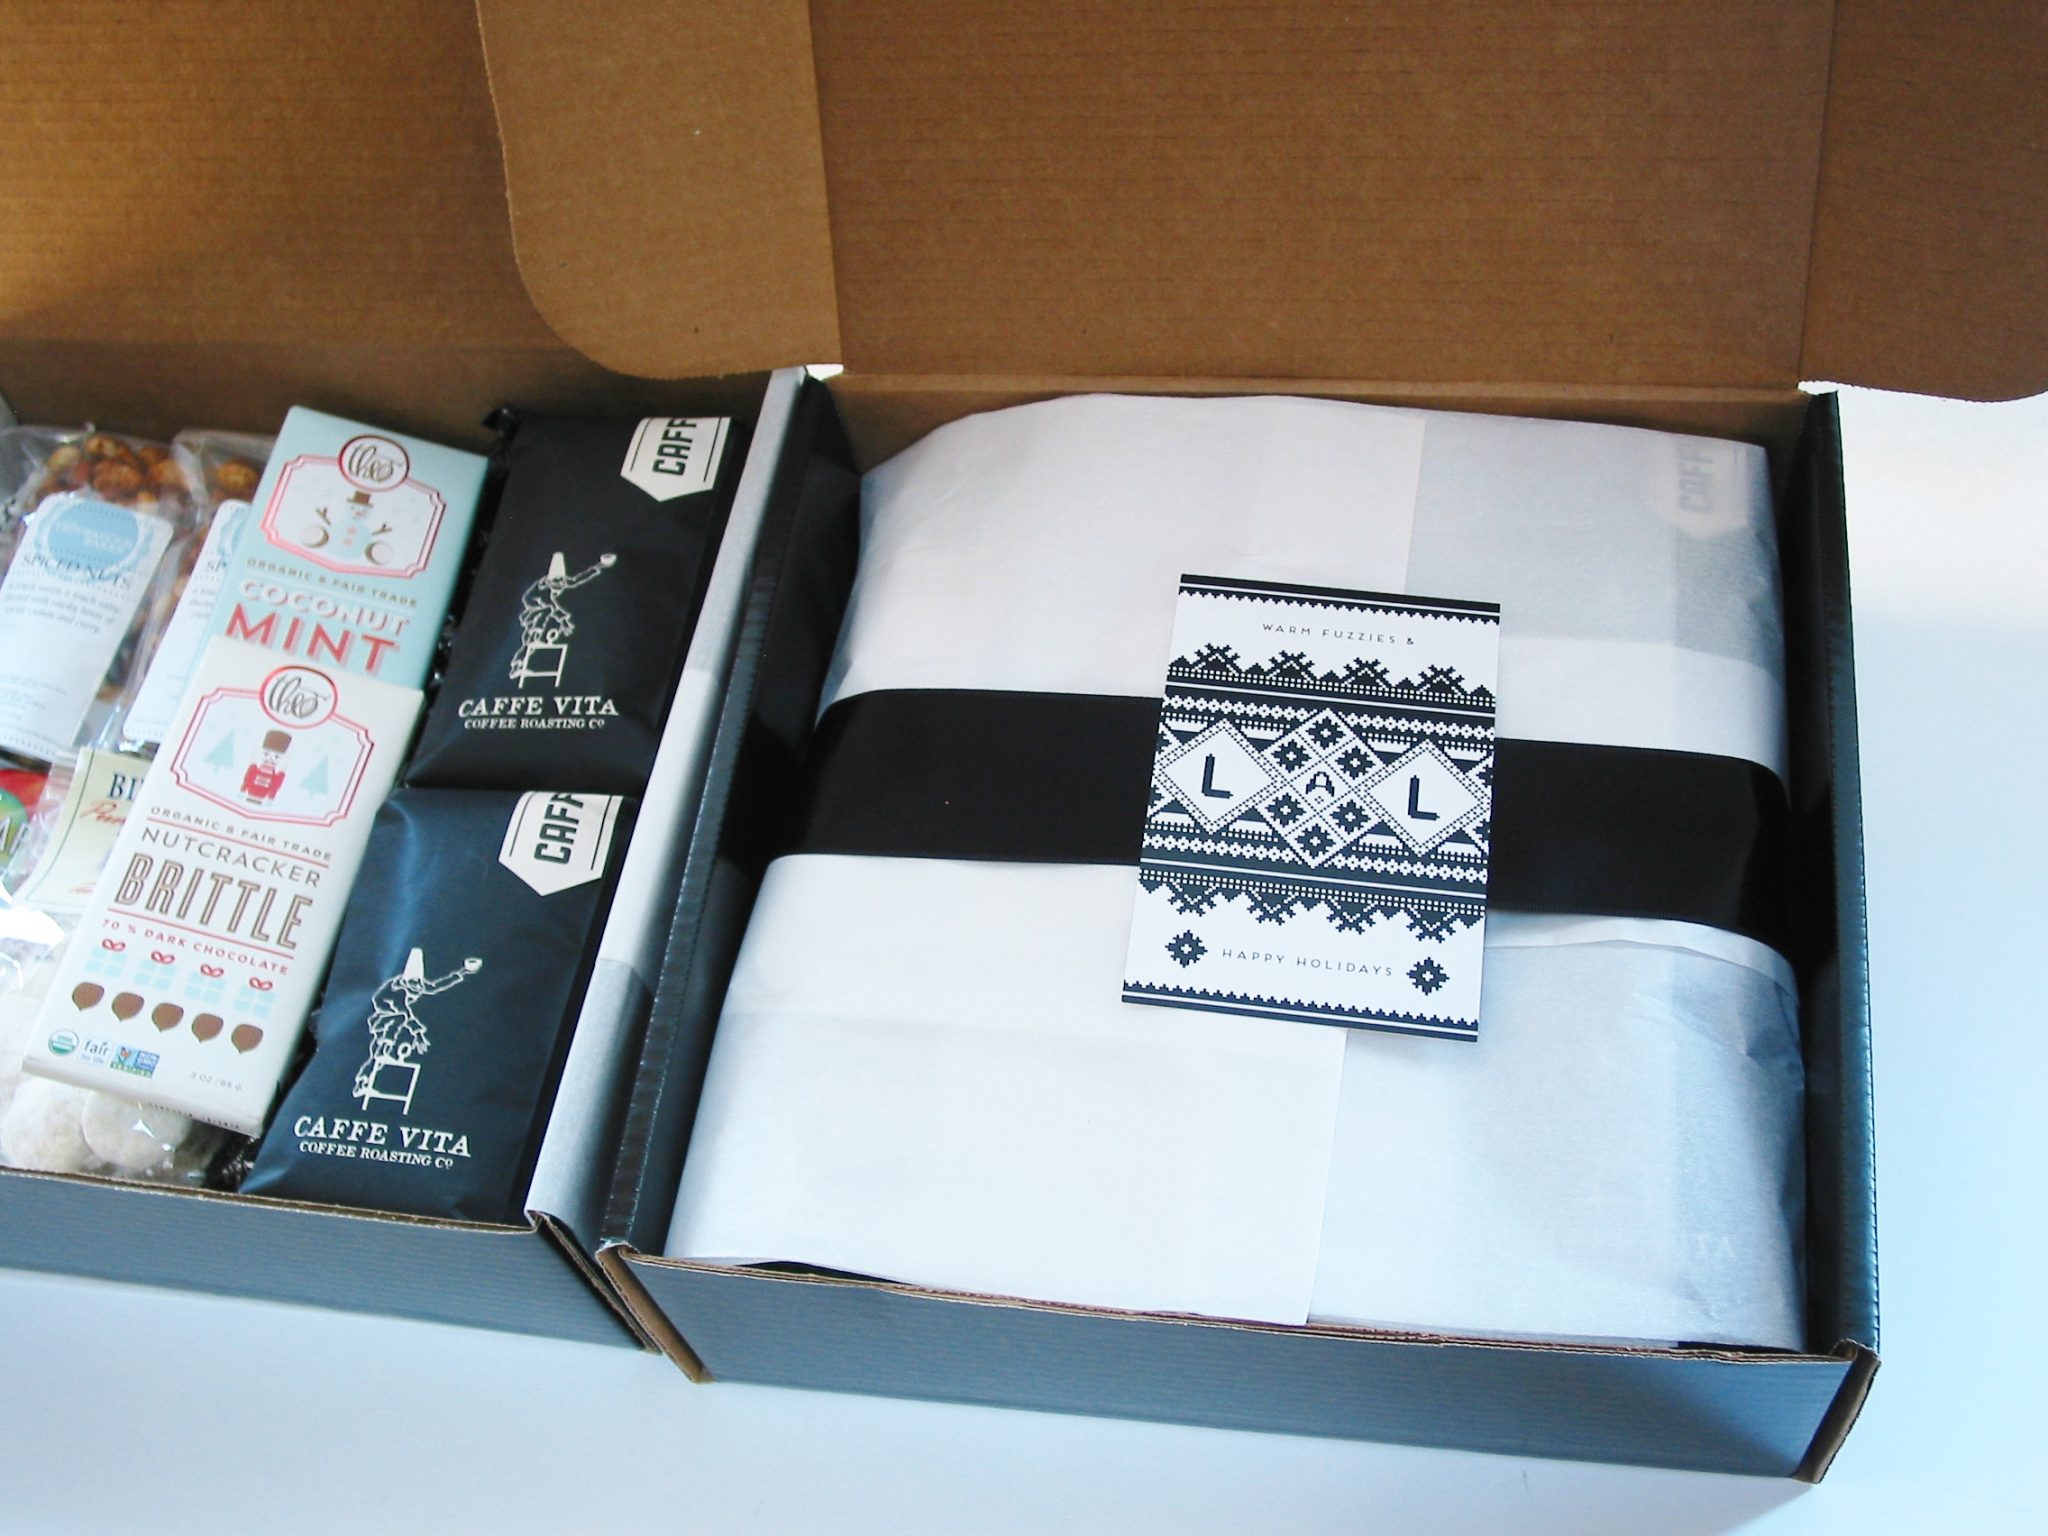 bumble B design's Custom Business Gift Boxes with Caffe Vita coffee, Theo chocolate & other local goodies